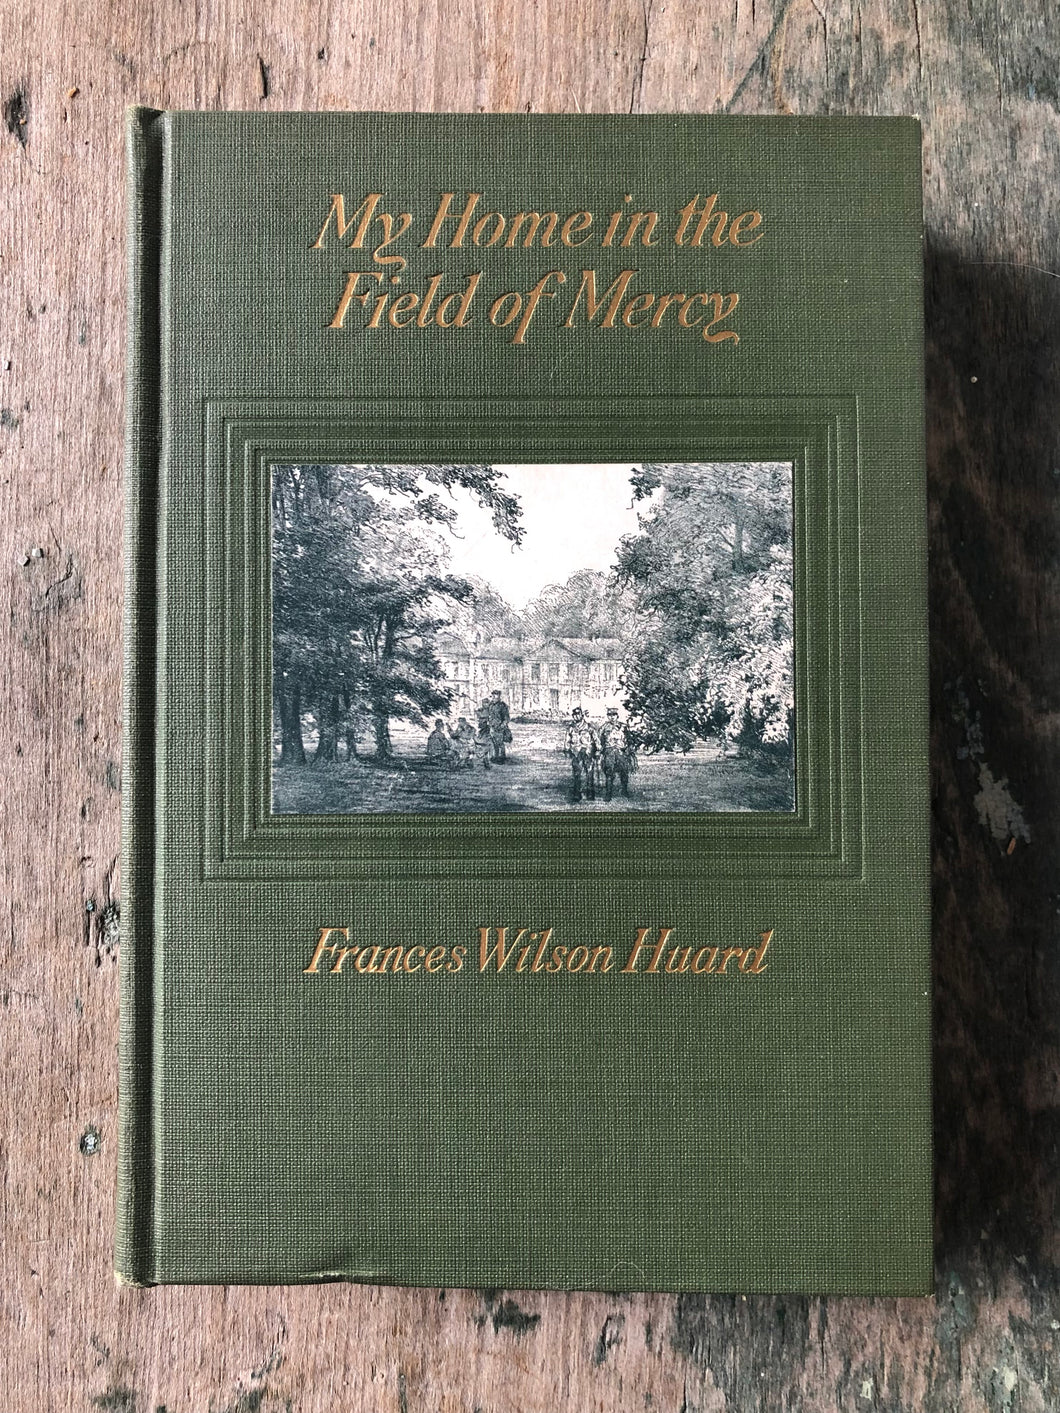 My Home in the Field of Mercy by Frances Wilson Huard with drawings by Charles Huard